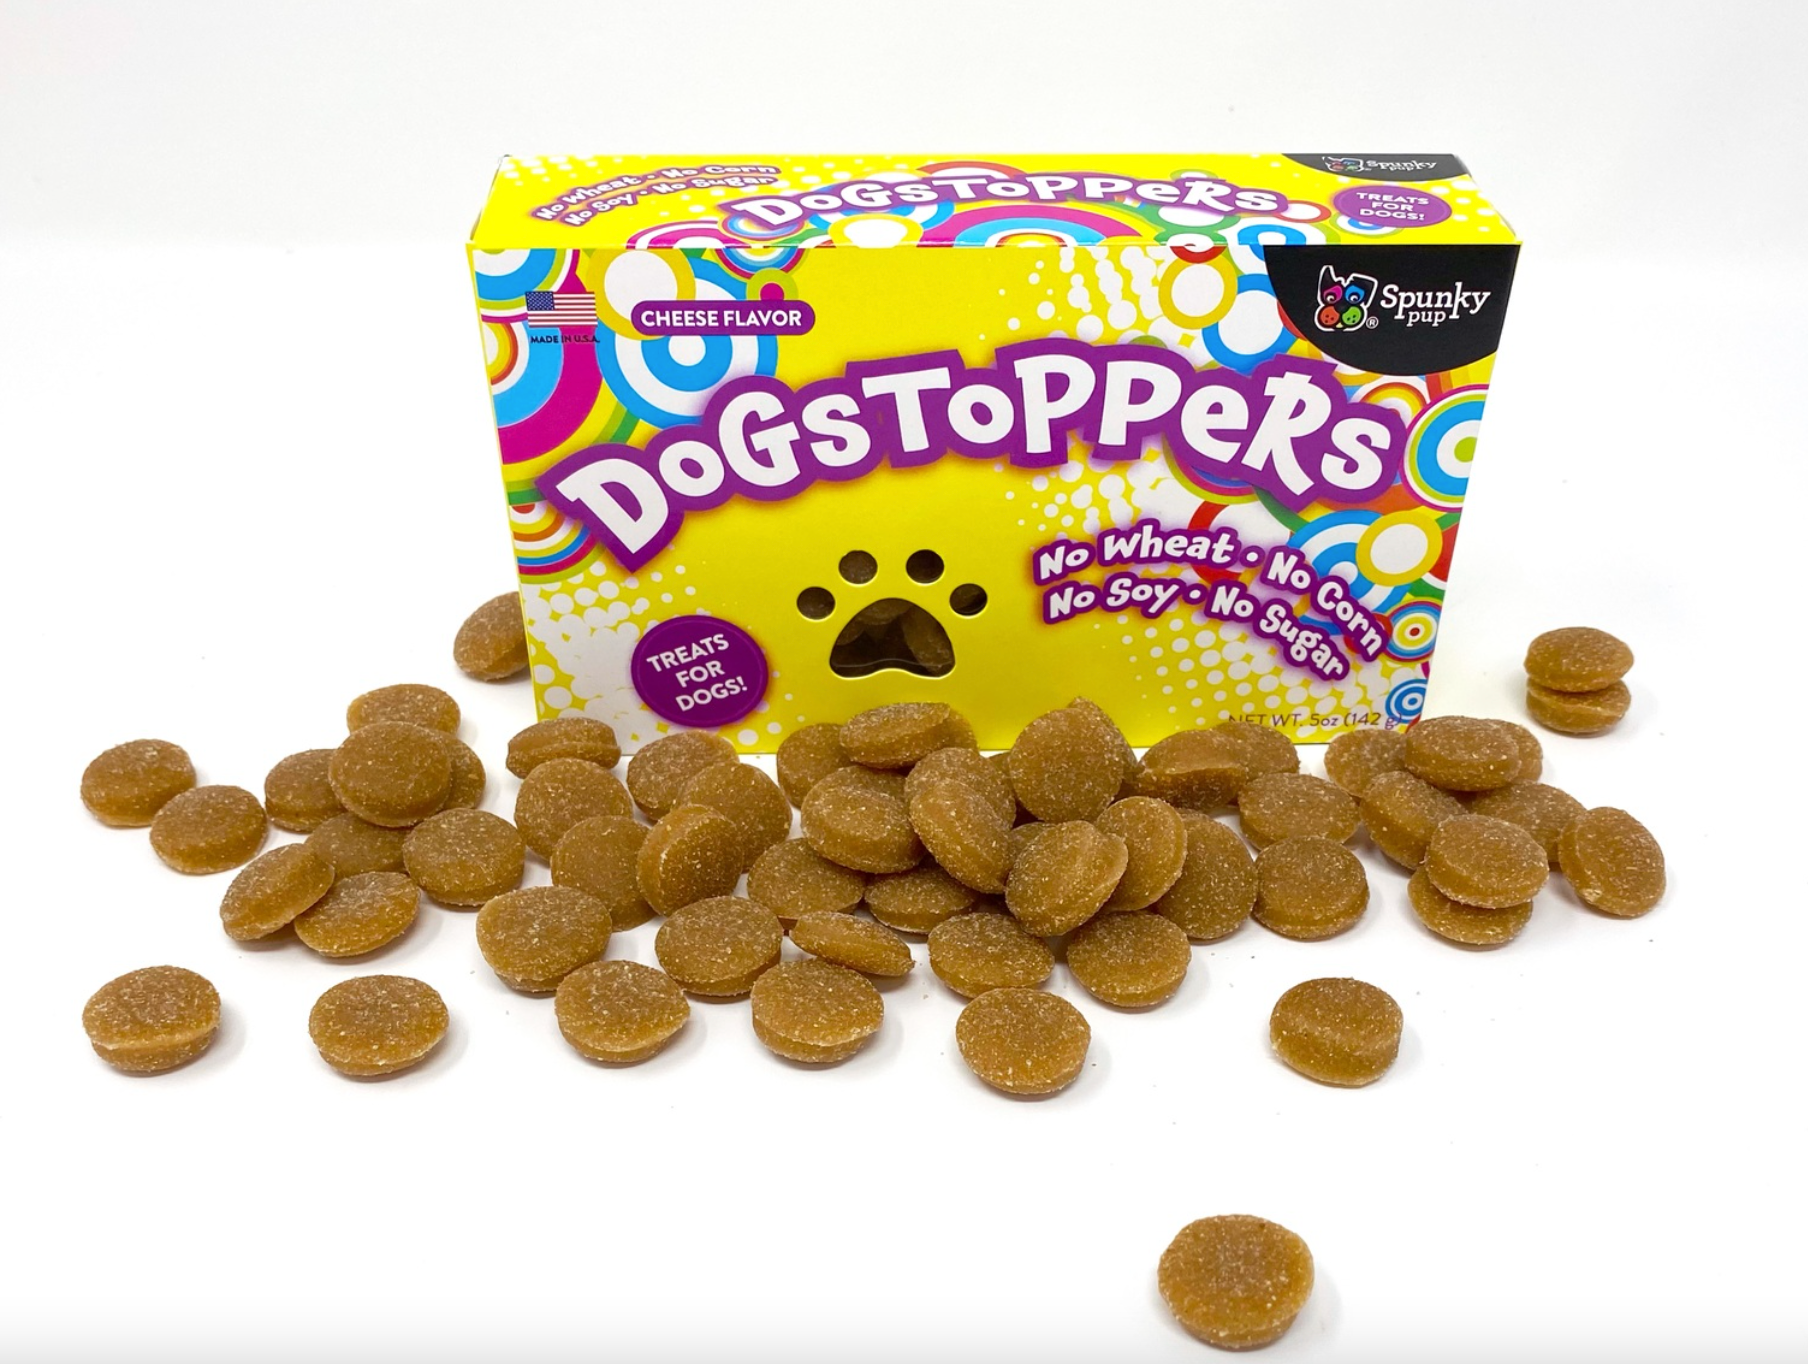 Spunky Pup  "Dogstoppers" Salmon Flavor Dog Treats